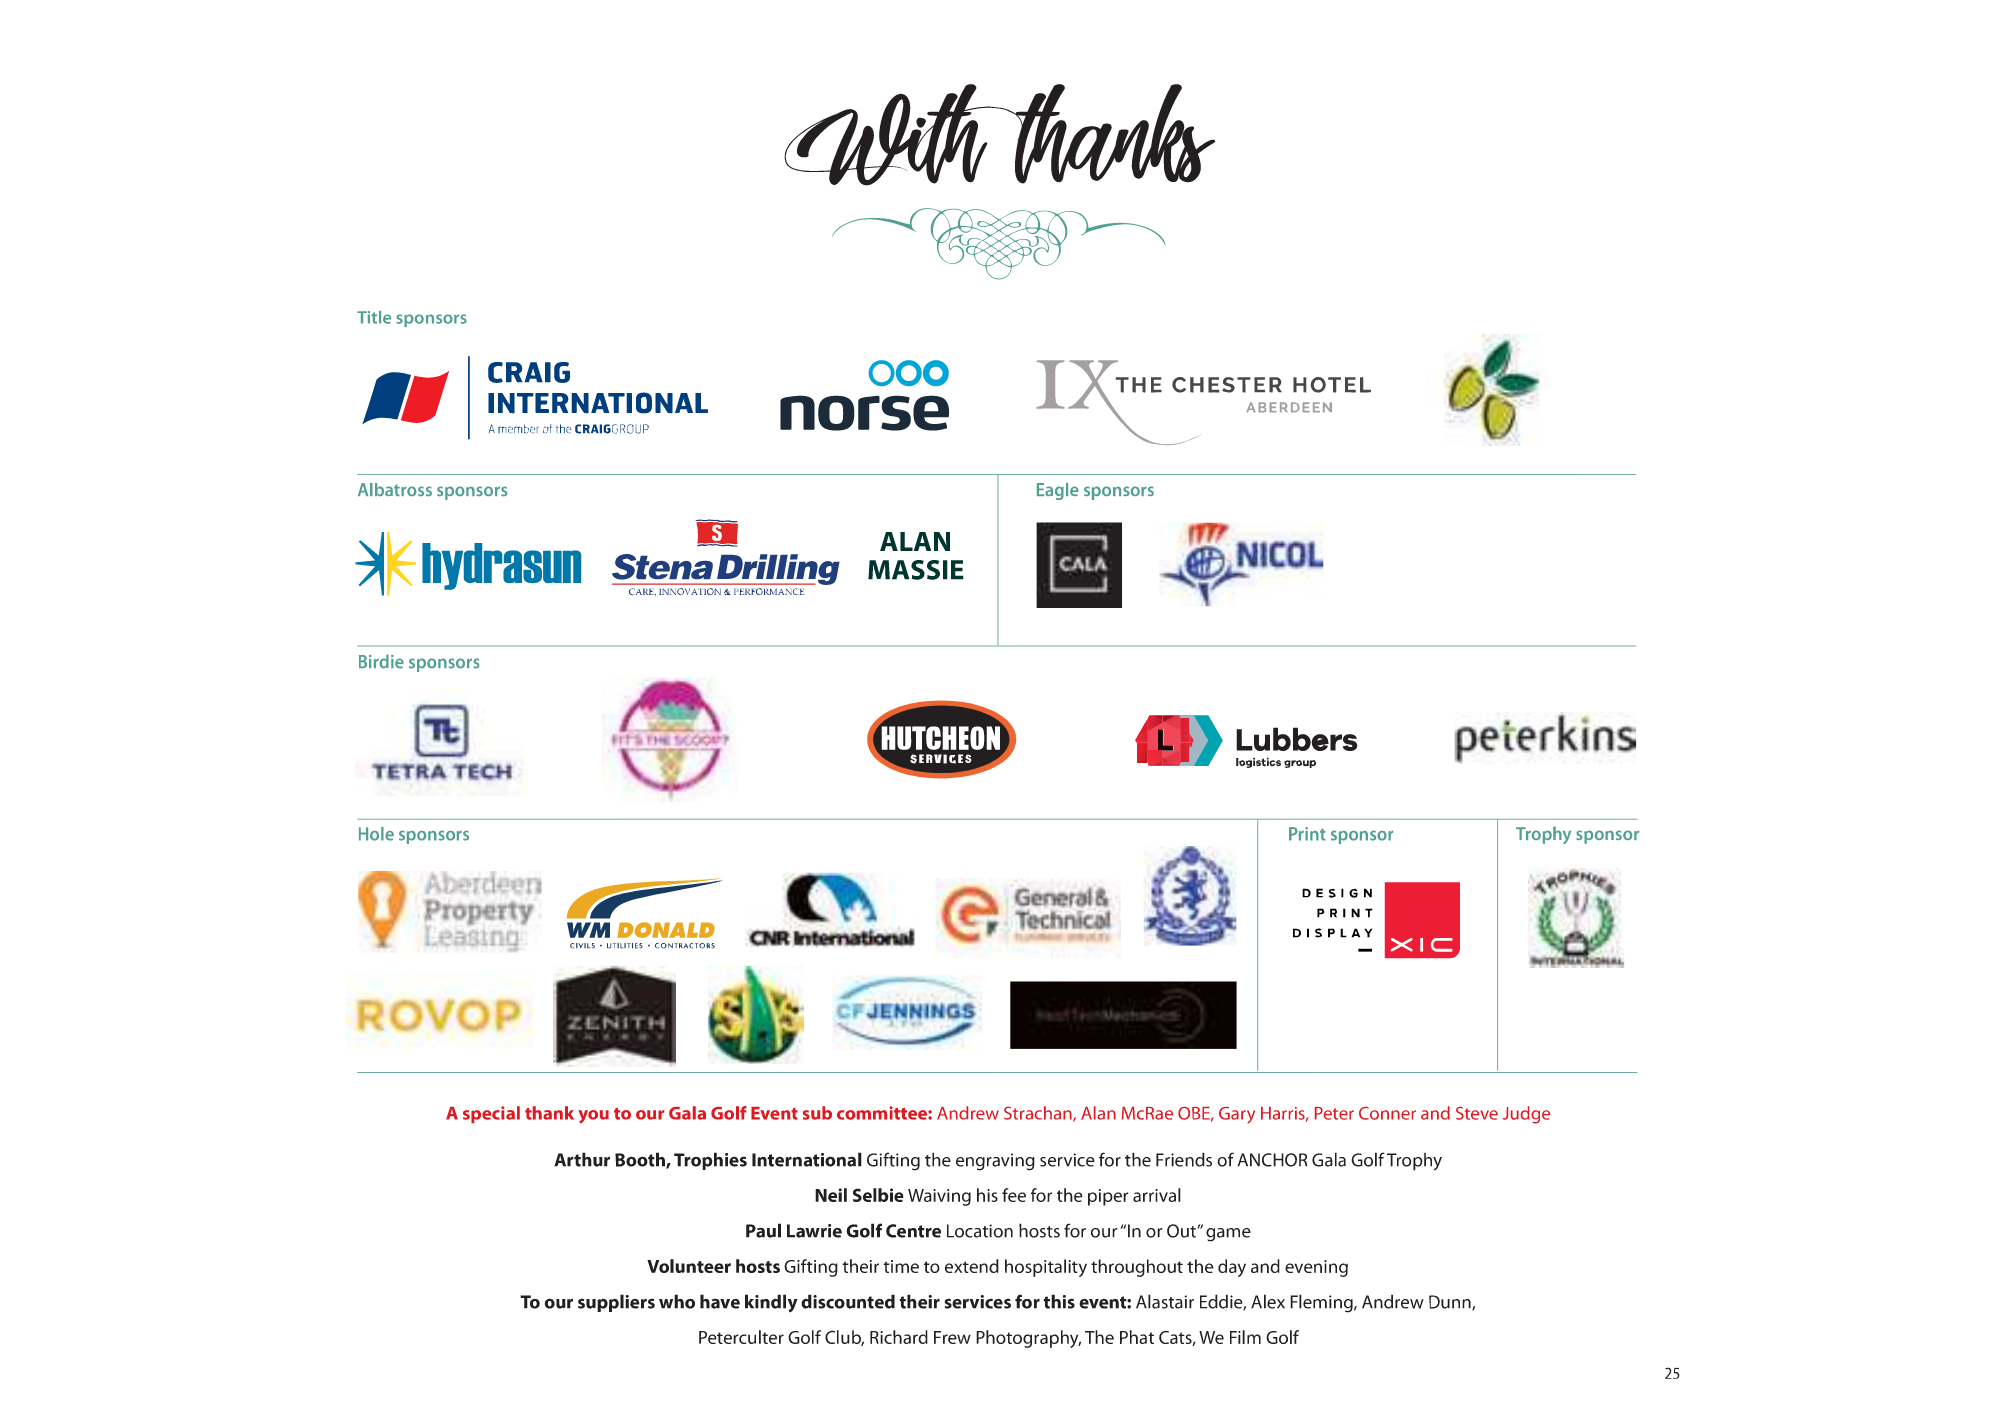 Sponsors of the Event.